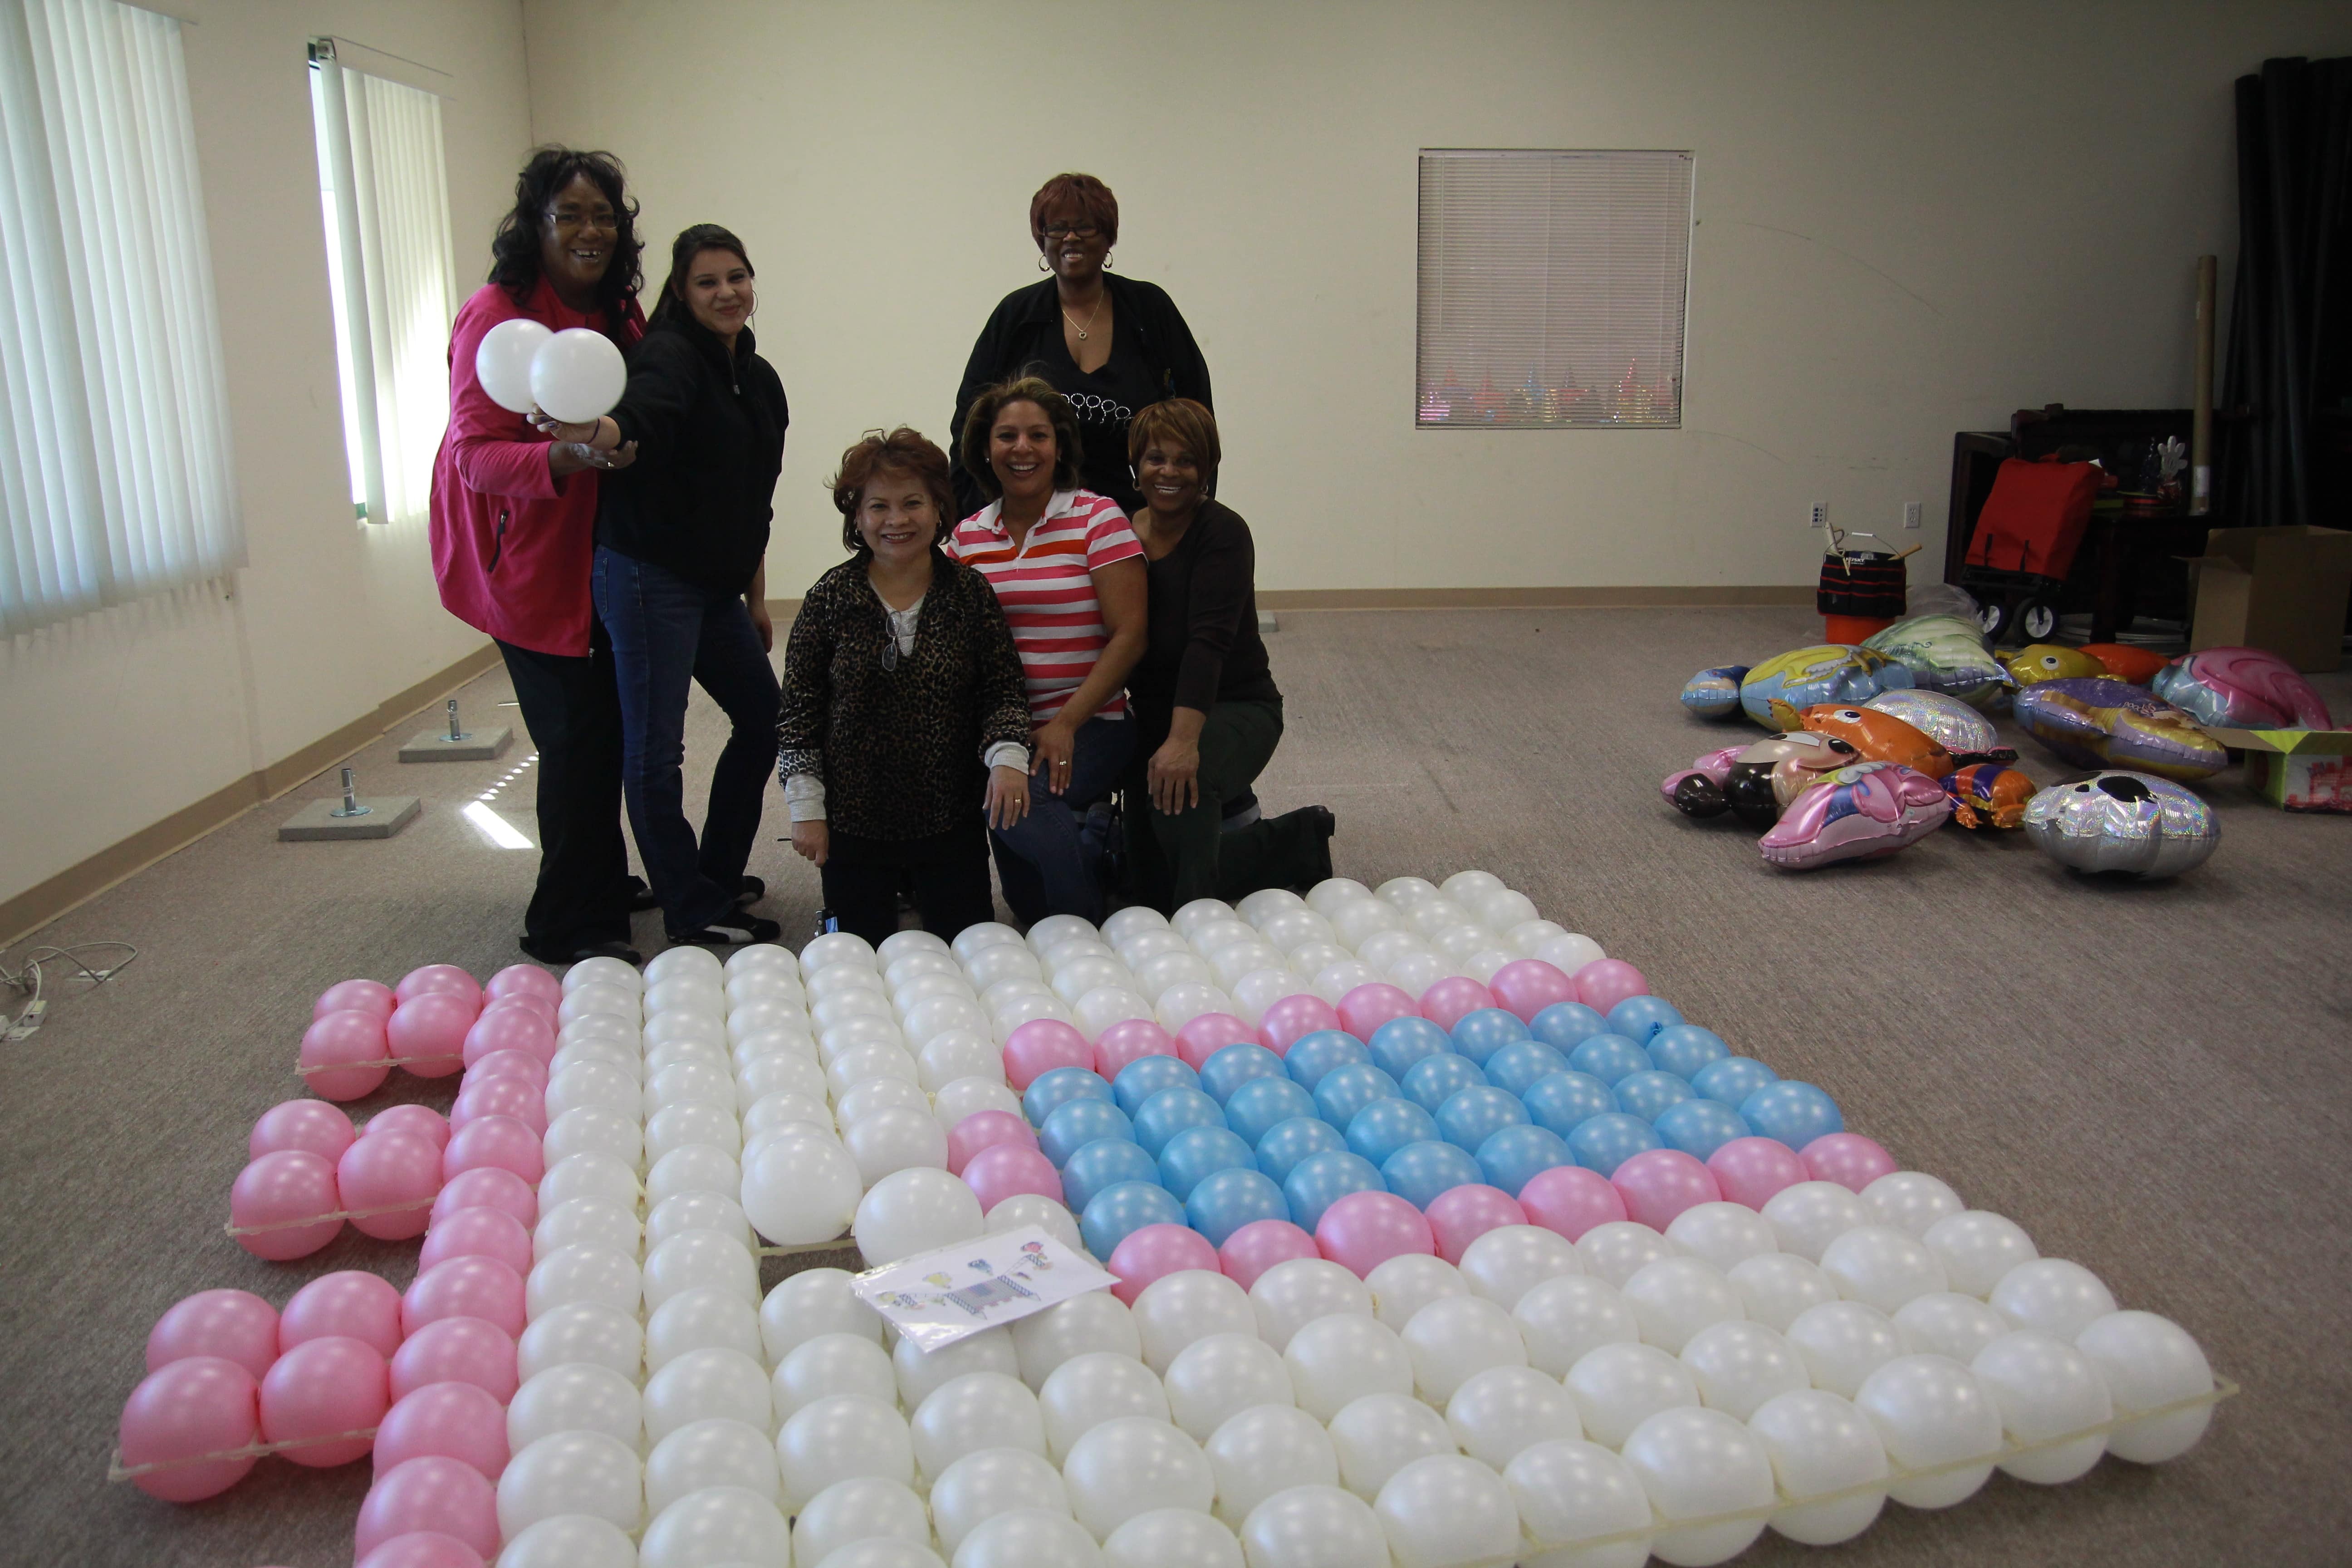 event decorating academy balloon course pictures